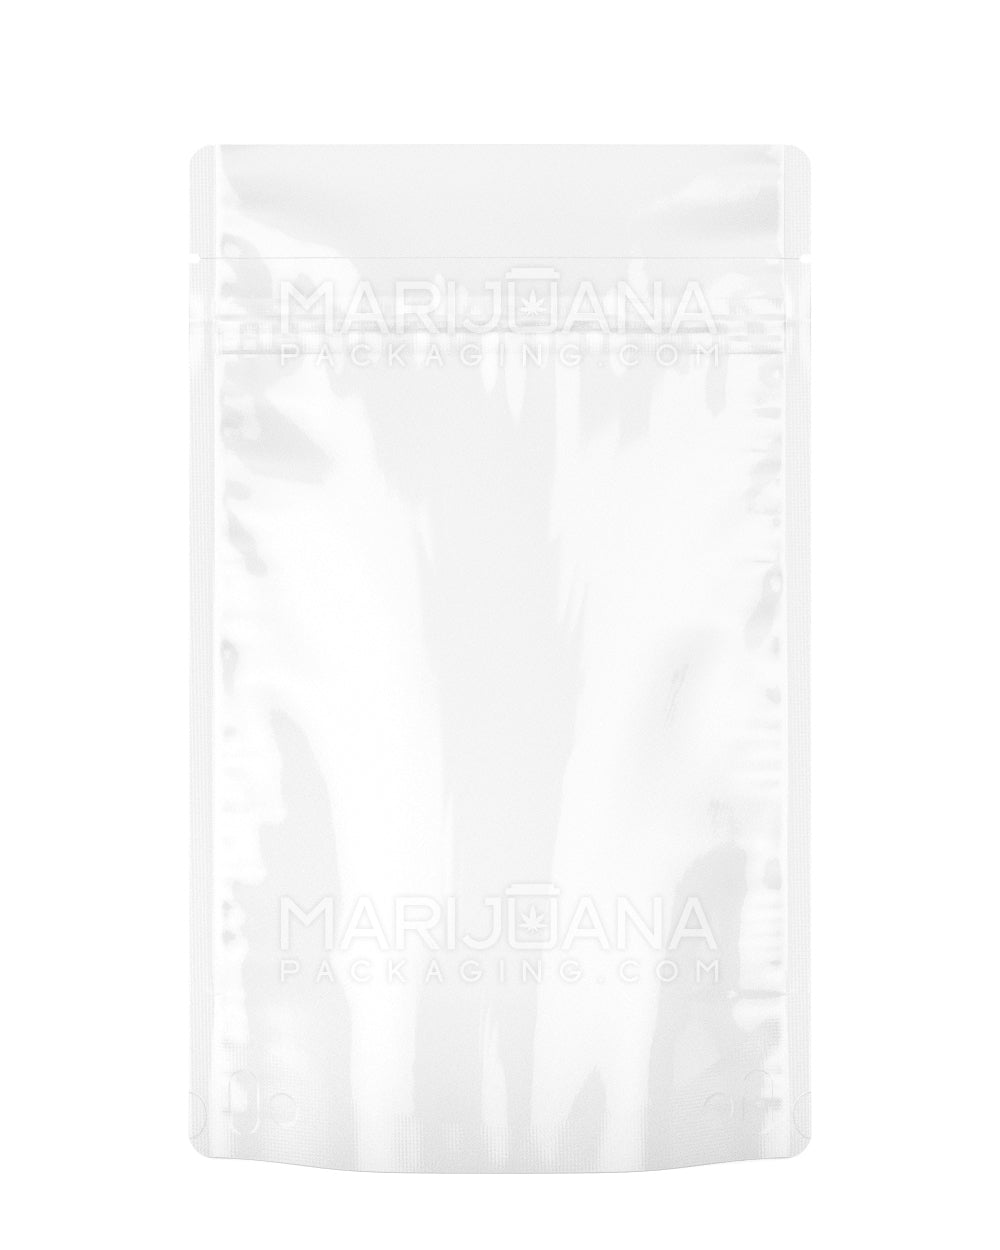 Tamper Evident | Glossy White Vista Mylar Bags (Tear Notch) | 3in x 4.5in - 1g - 1000 Count